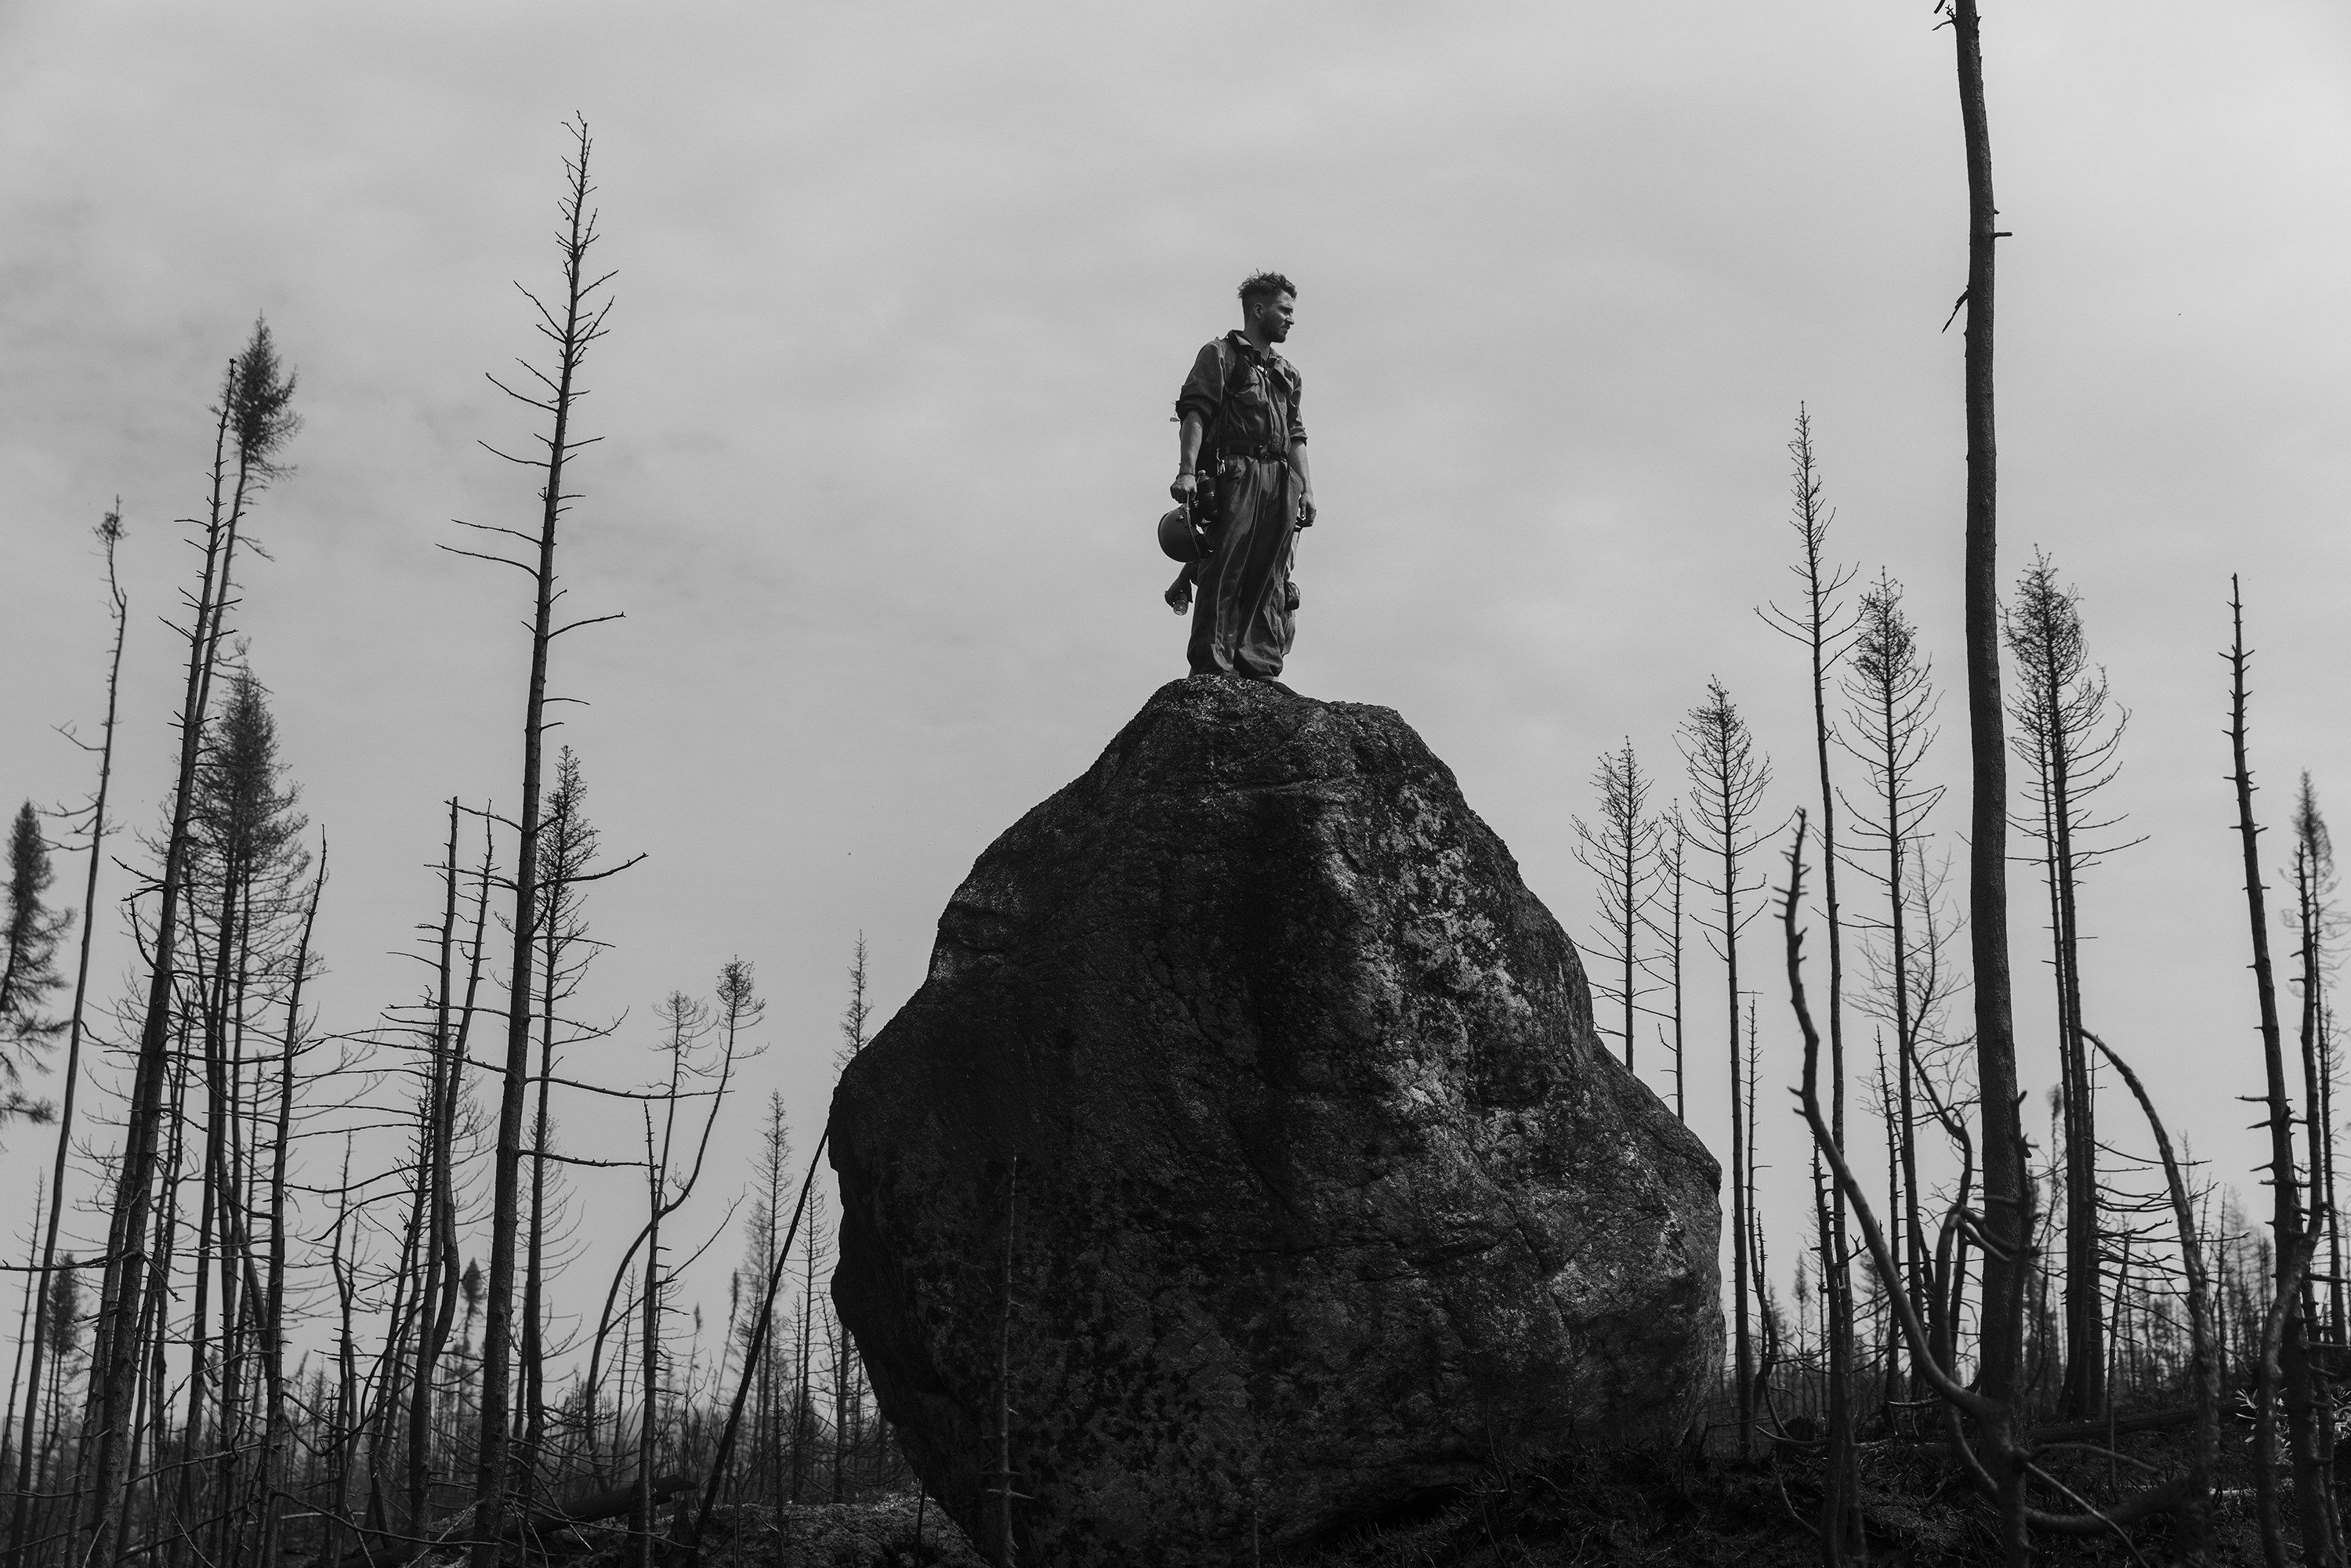 A black and white image of a man standing on a rock in a burnt landscape